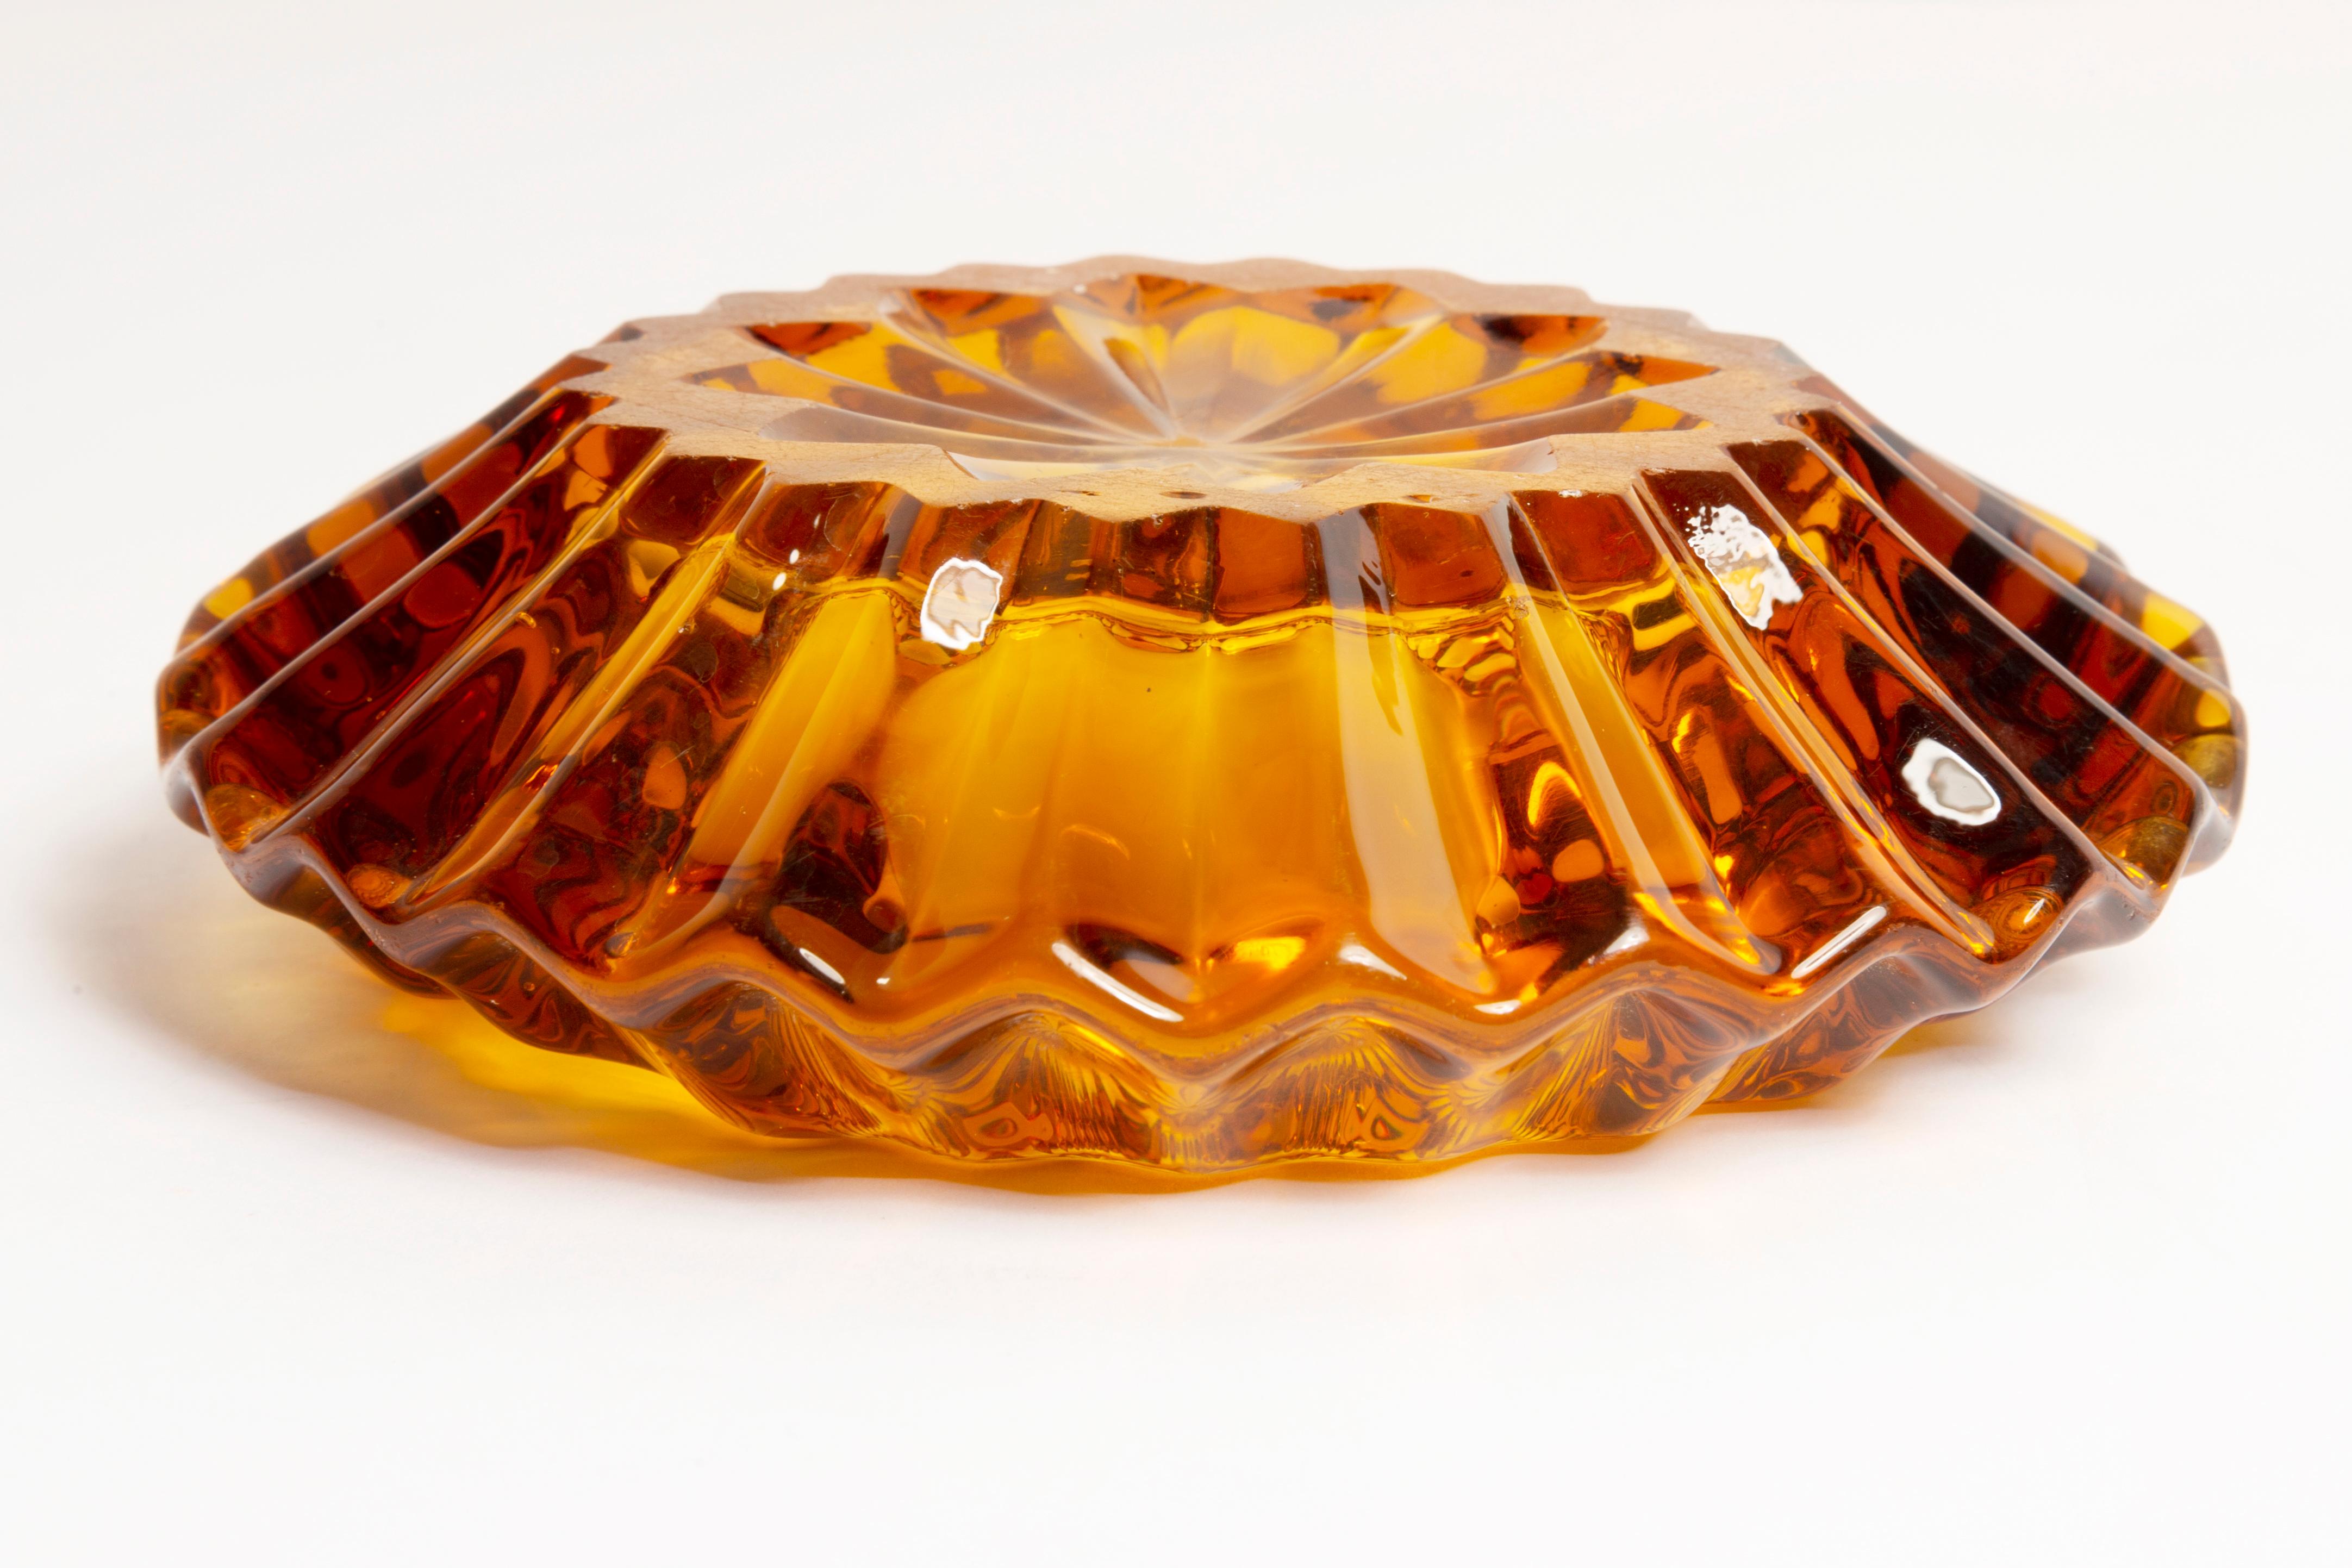 Midcentury Crystal Mustard Yellow Glass Bowl Ashtray, Italy, 1970s For Sale 1